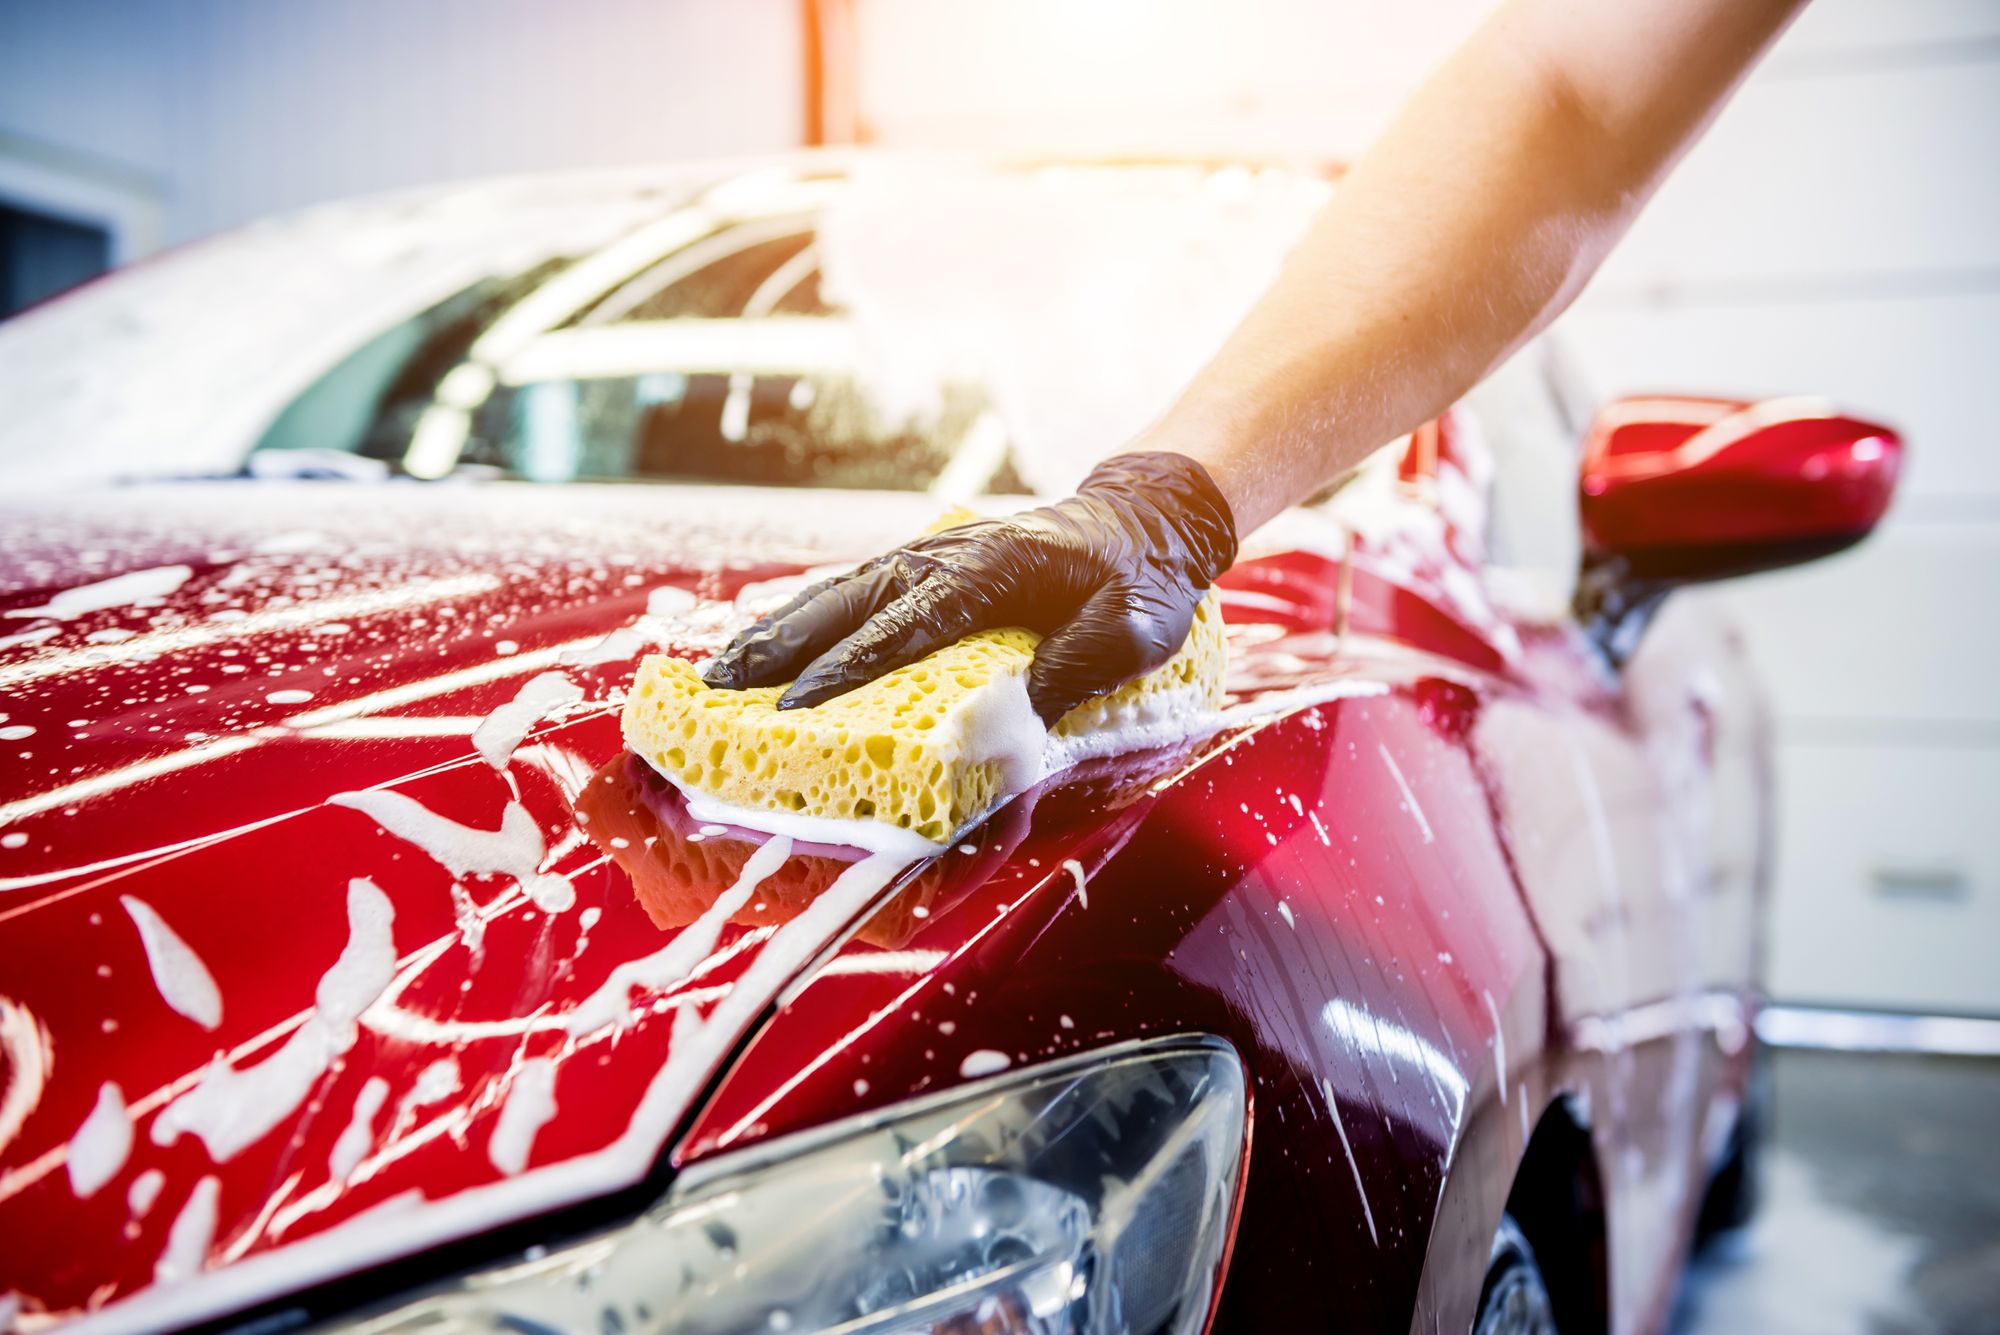 The 22 best car cleaning products of 2023